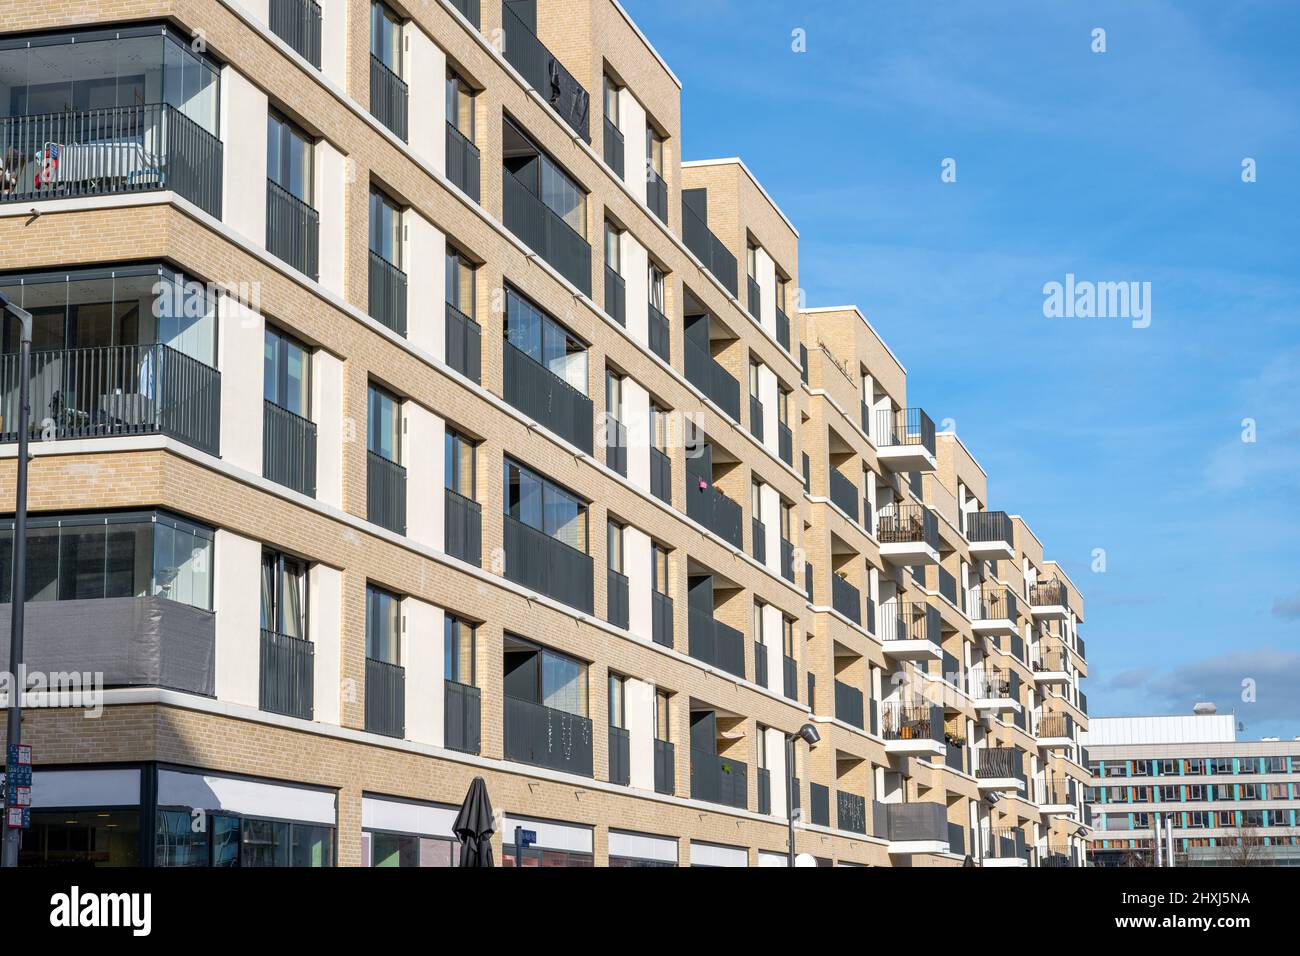 Modern apartment buildings in a housing development area in Berlin, Germany Stock Photo